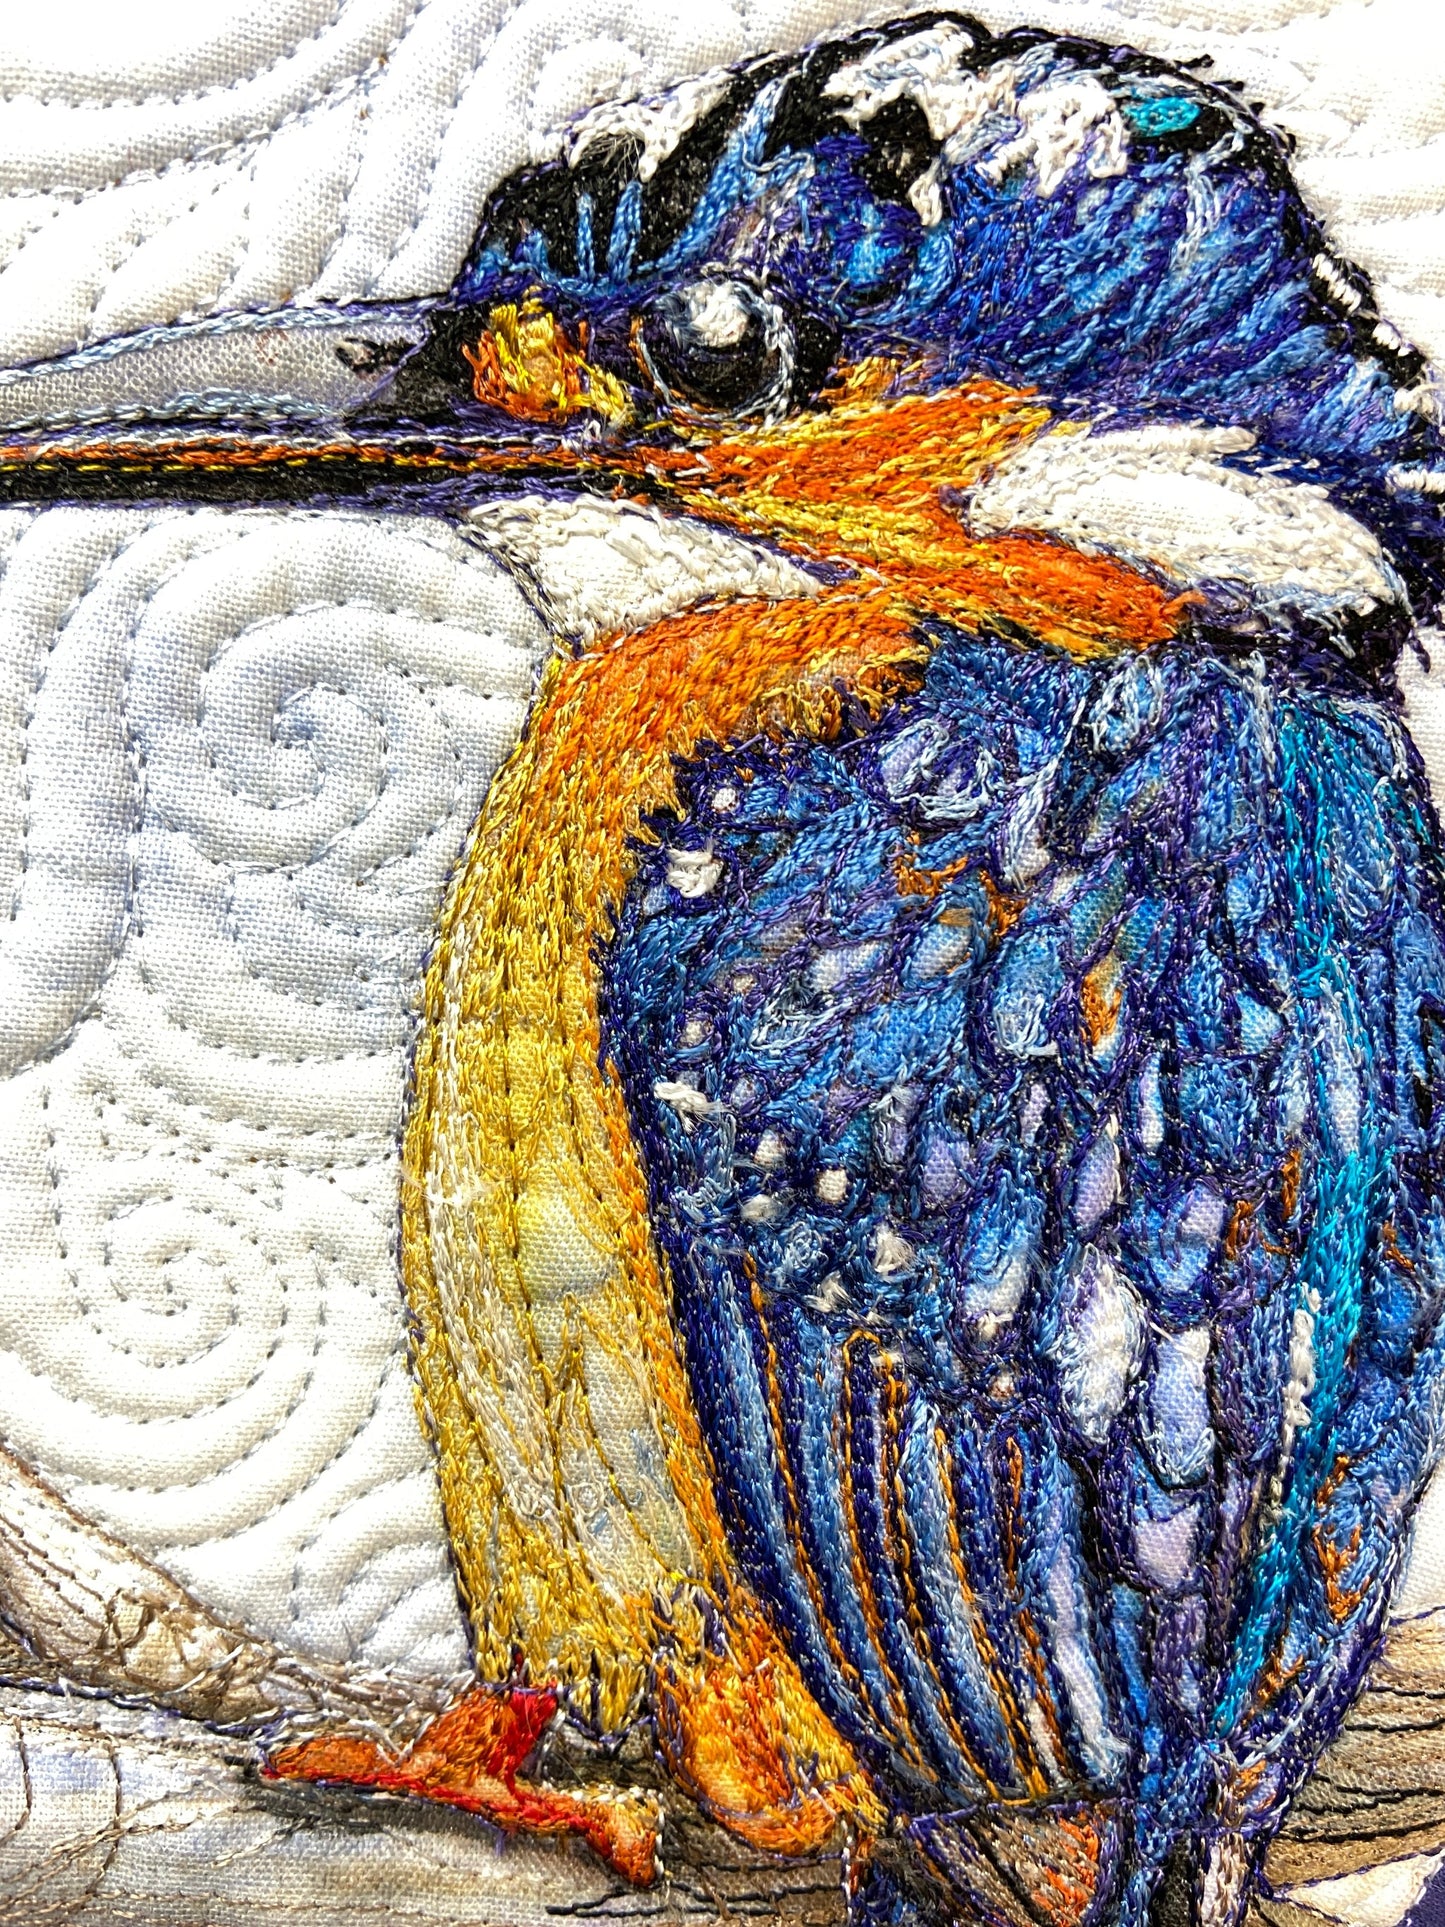 2 Sew Textiles, Workshop in a box Kingfisher Design Details with Julie Haddrick